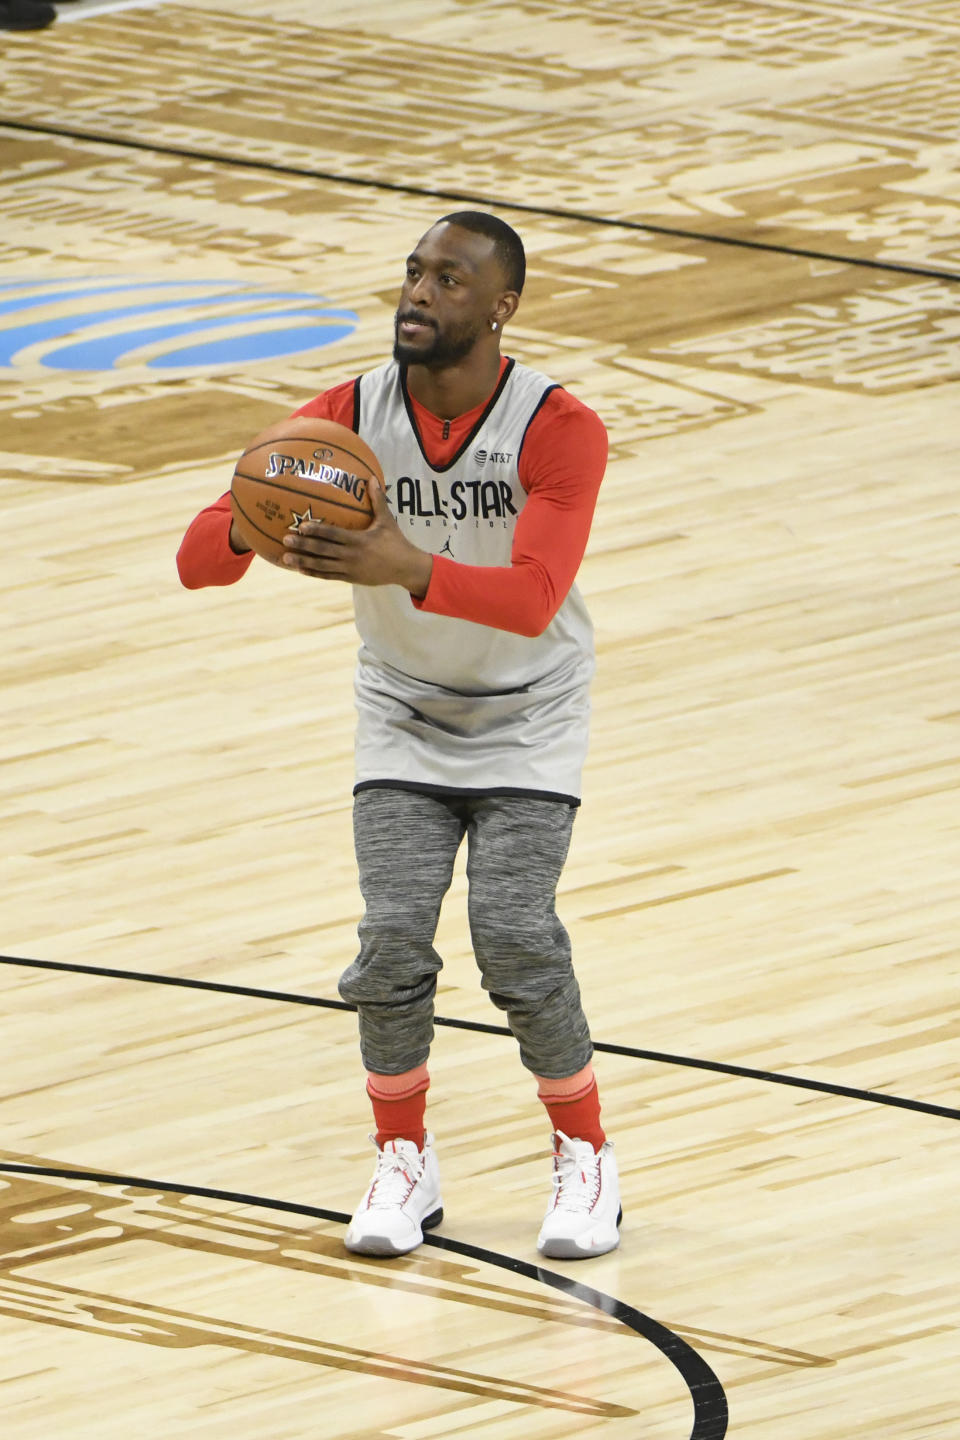 Kemba Walker, of the Boston Celtics, warms up during practice at the NBA All-Star basketball game, Saturday, Feb. 15, 2020, in Chicago. (AP Photo/David Banks)